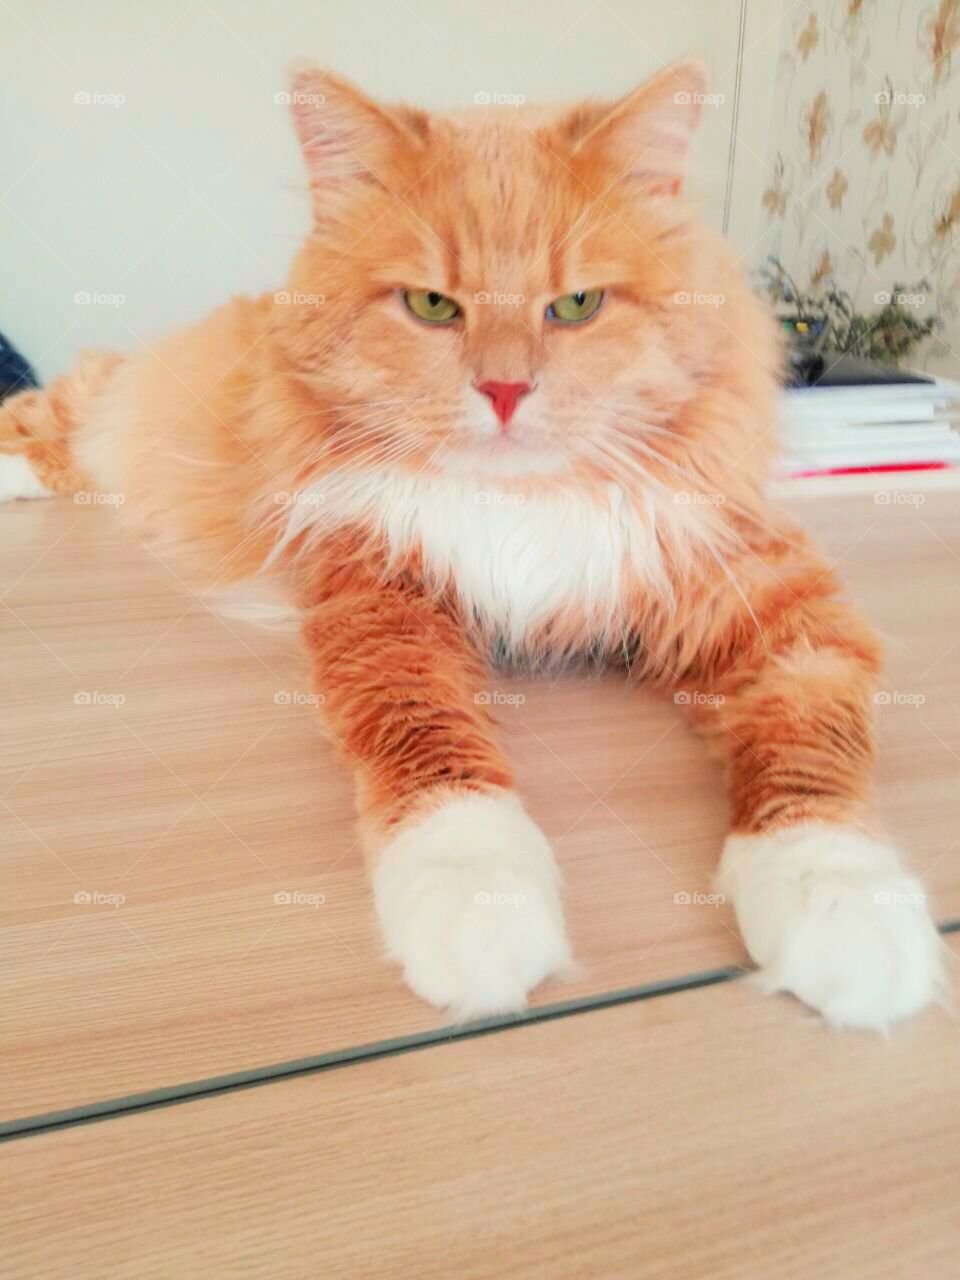 Ginger cat with white paws and chest lying on table